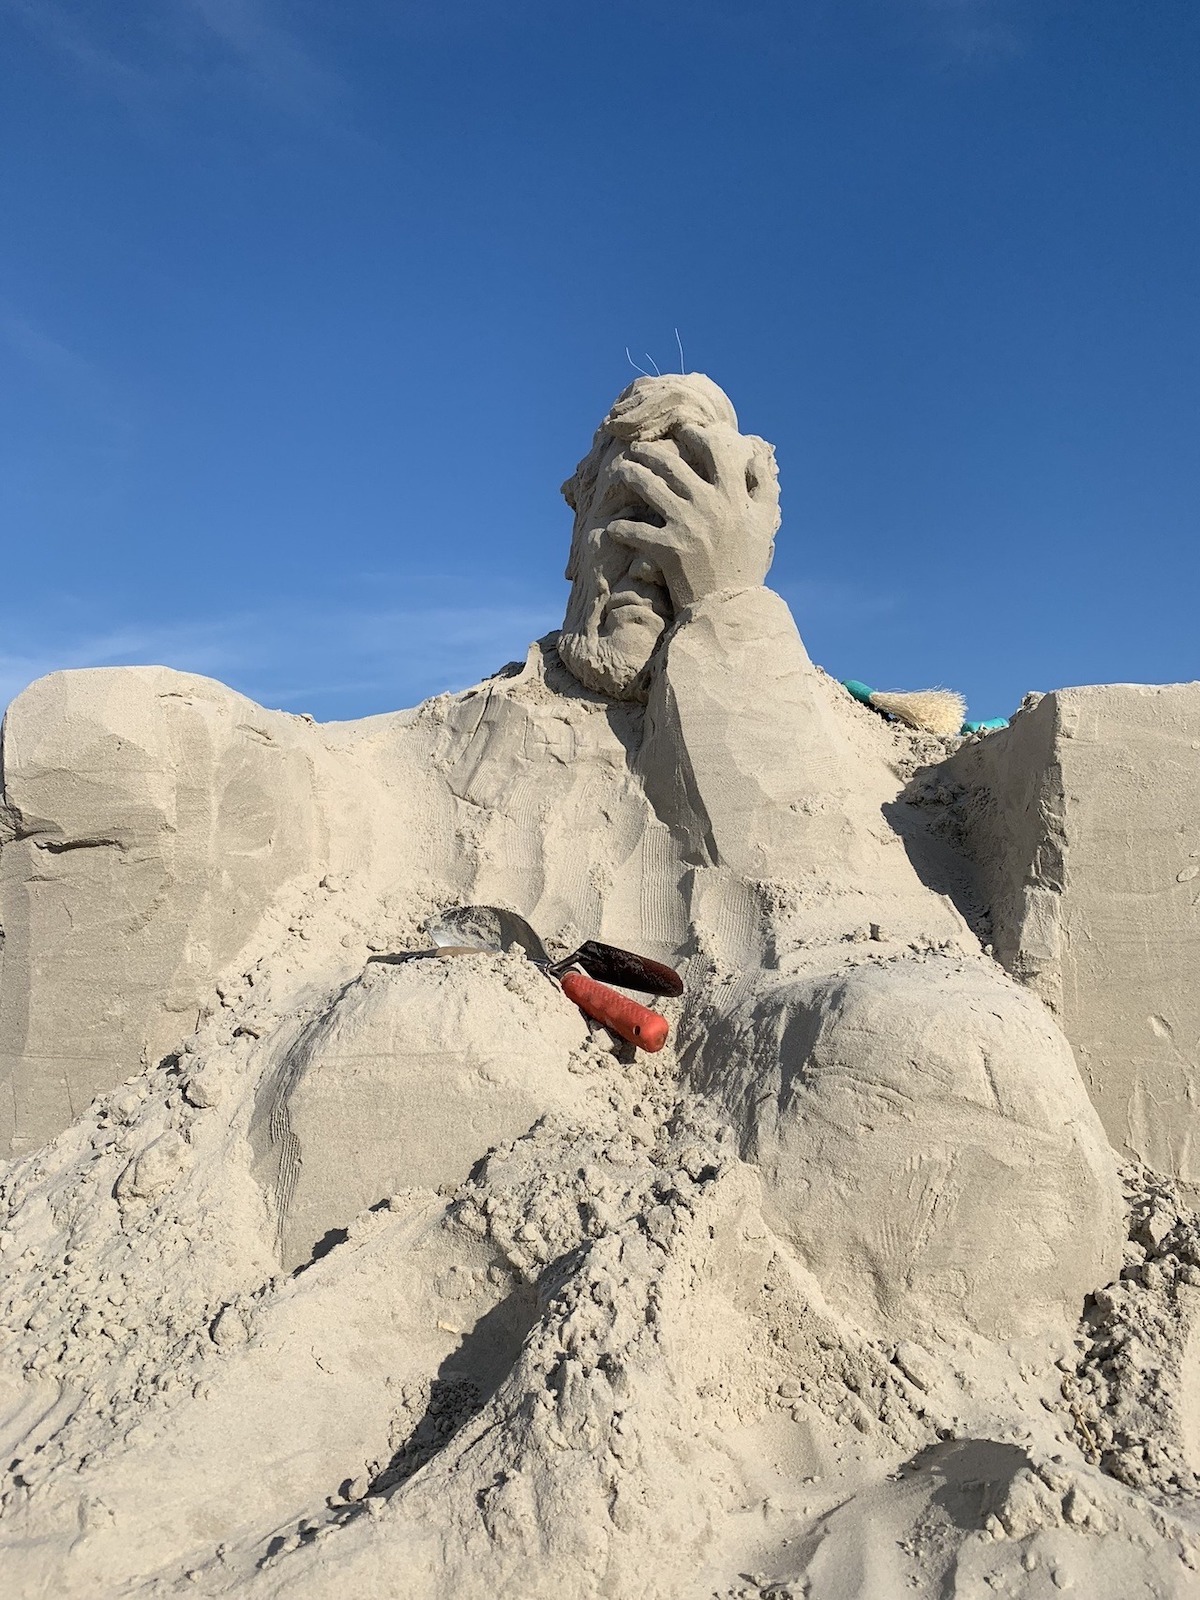 Giant Sand Sculpture Of The Lincoln Memorial With A Crumbling Base Won Festival